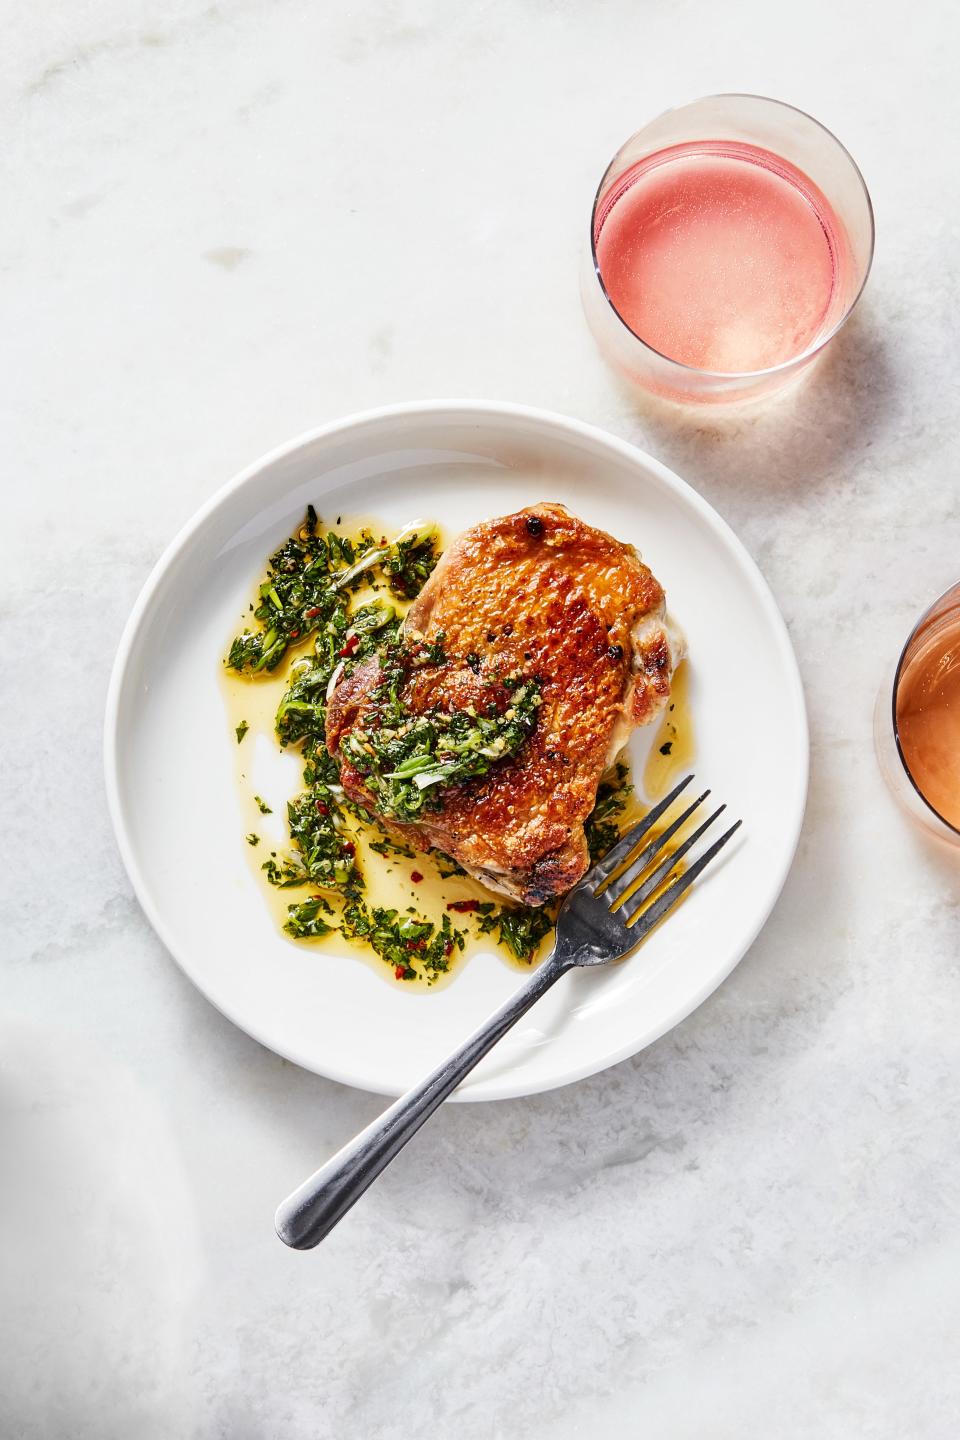 <h1 class="title">Chicken Under a Brick in a Hurry</h1><cite class="credit">Photo by Chelsie Craig, Food Styling by Rebecca Jurkevich</cite>